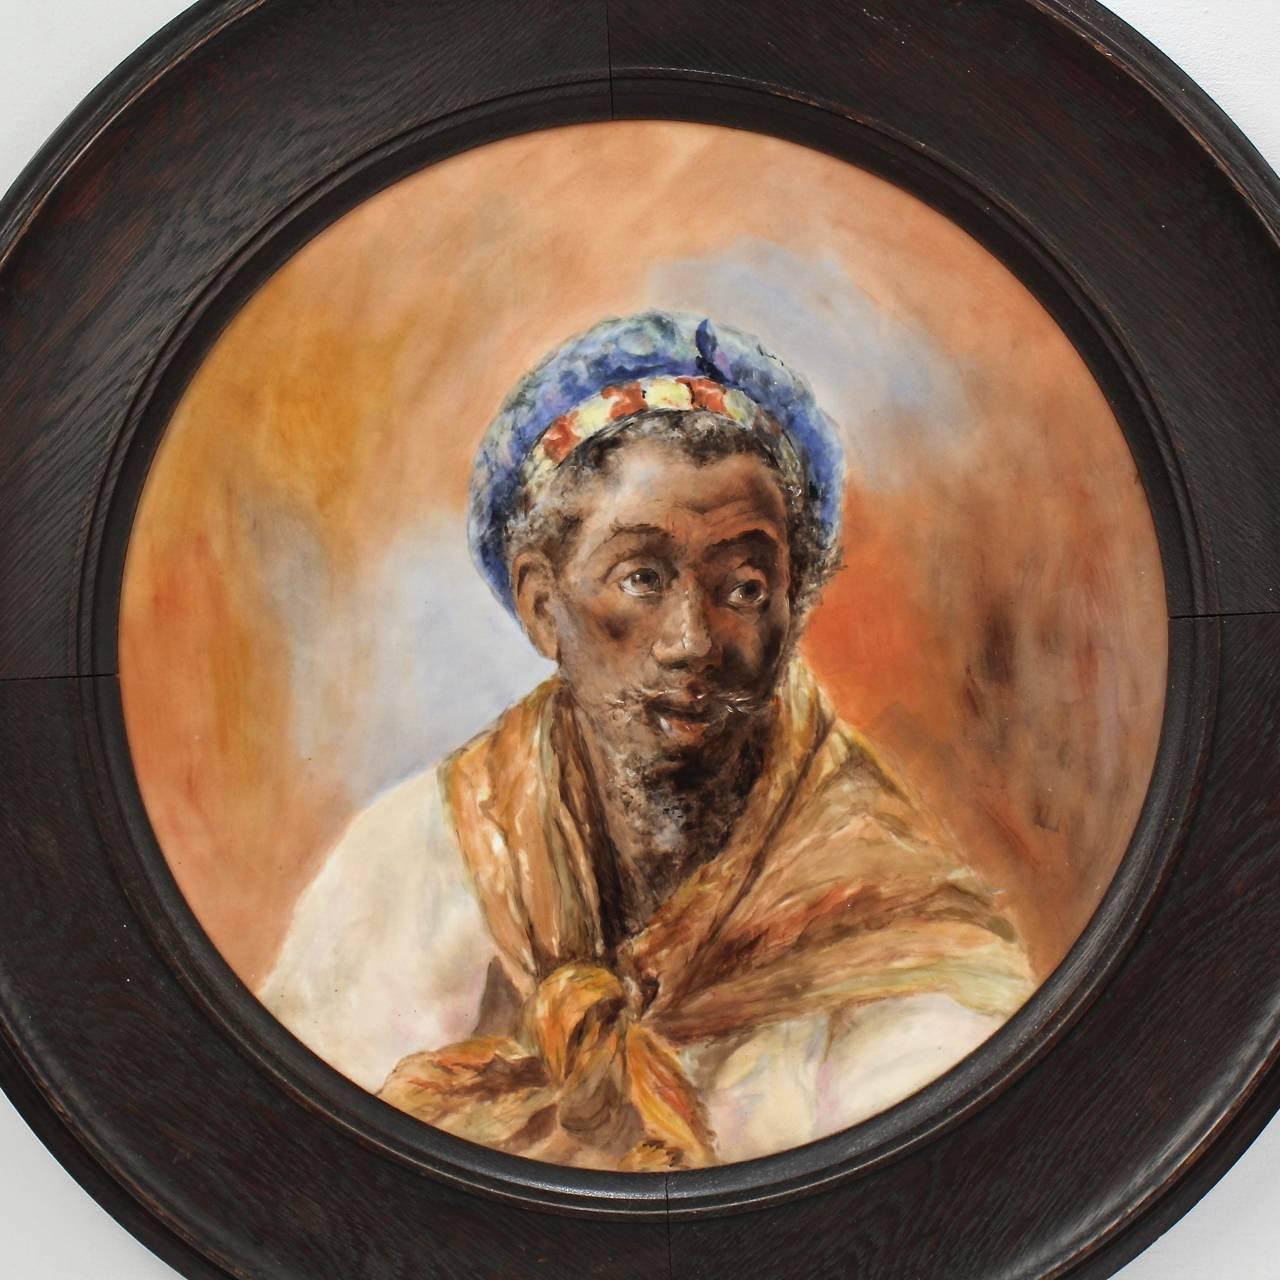 A fantastic, large-scale antique Orientalist hand-painted Limoges wall plaque.

Depicting a North African sitter in three quarter profile much in the style of Jean Joseph Benjamin-Constant’s ‘Head of a Moor’ or the many Spanish Moor paintings by